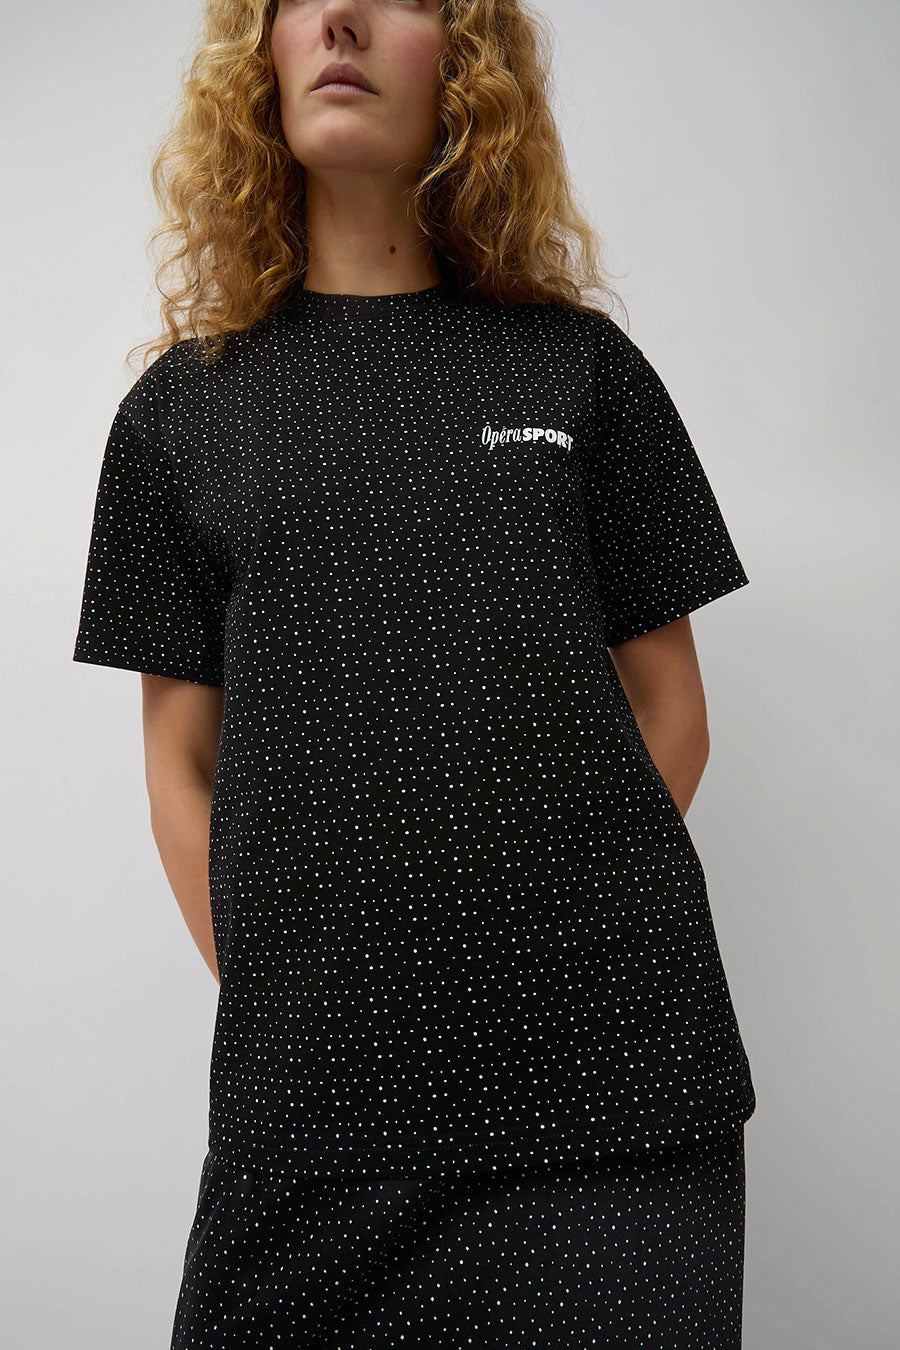 OpéraSPORT Clive Unisex T-Shirt in Dots